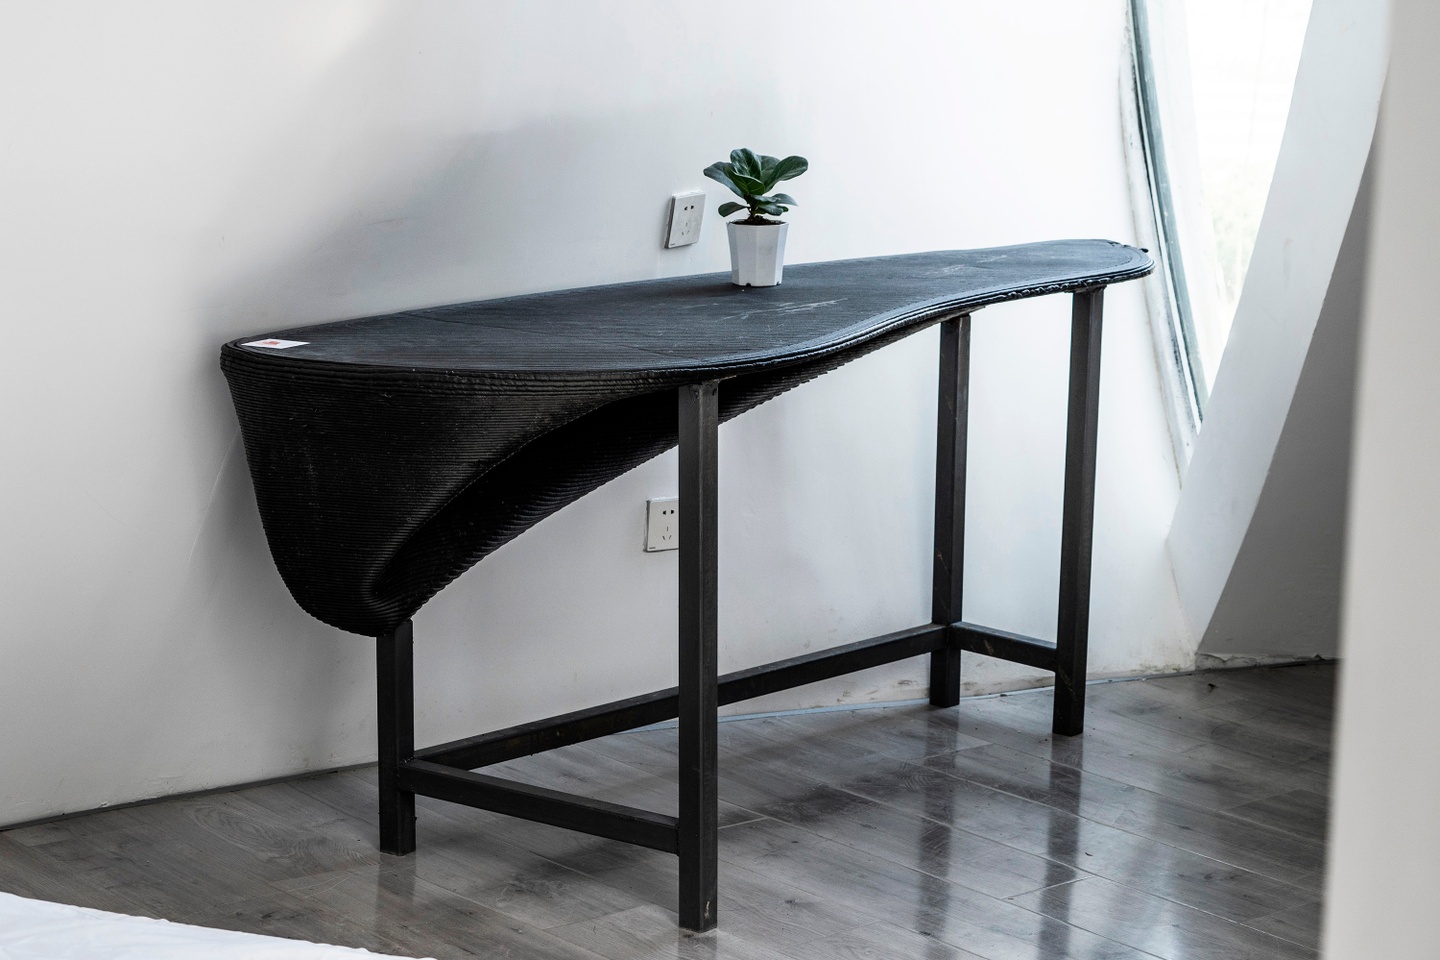 A black, 3-D printed side table with four legs. The top of the table is curvilenear, and skinnier at the far end. Toward the front of the table, the surface has depth underneath.